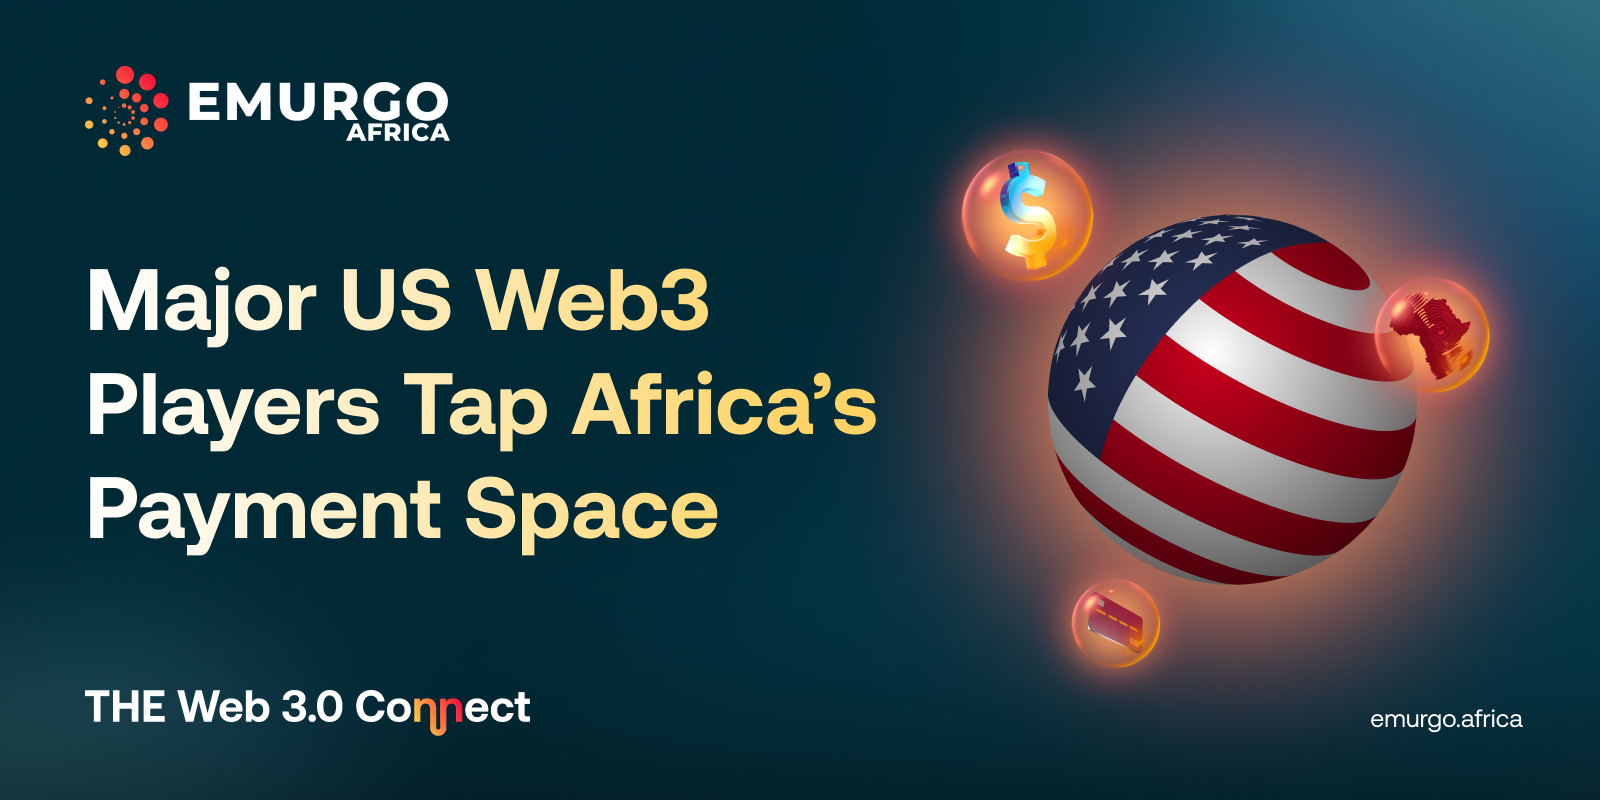 Major US Web3 Players Tap Africa’s Payment Space